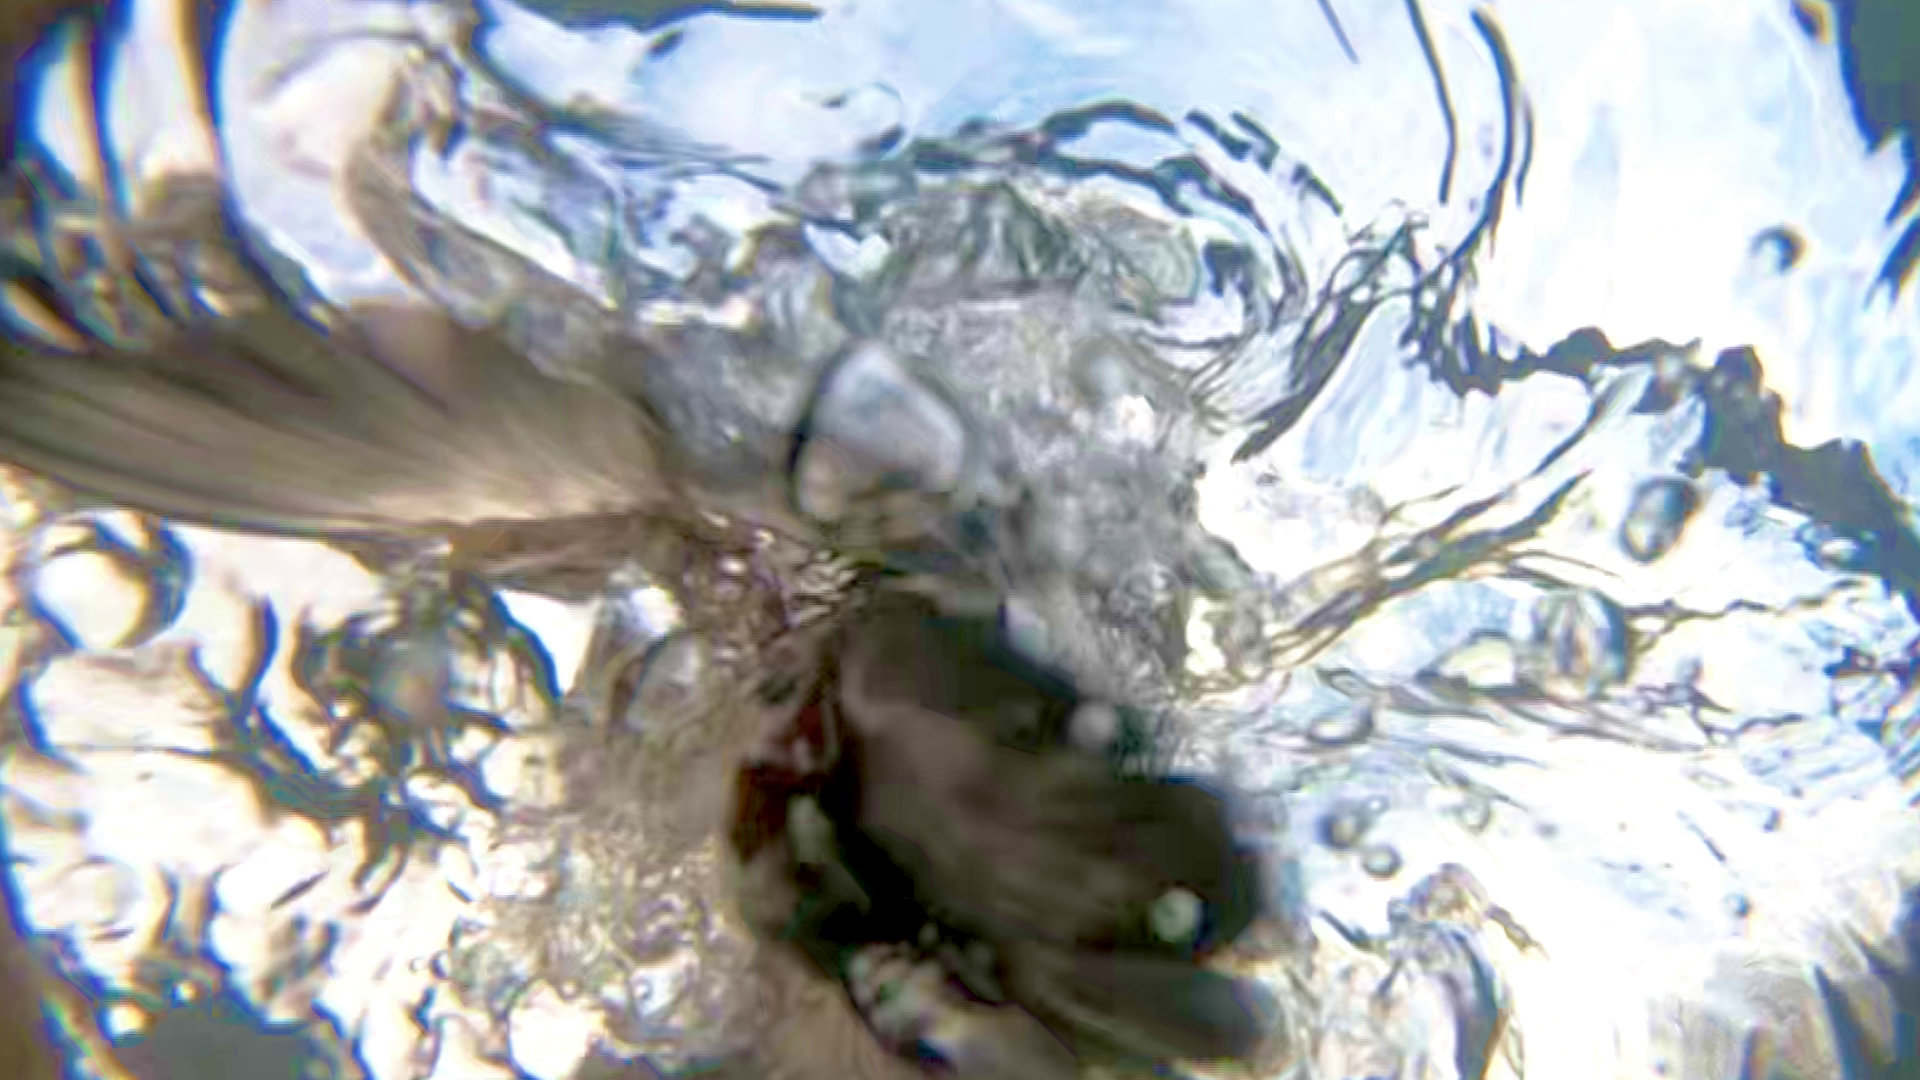 A dramatic fish-eye view shows life from beneath the surface - as a hidden underwater camera captures the moment a kingfisher dives from above to catch its next meal. The hidden GoPro camera shows the last peaceful seconds of the fish swimming along beneath the water's glassy surface - just before one of them becomes lunch for the agile kingfisher.